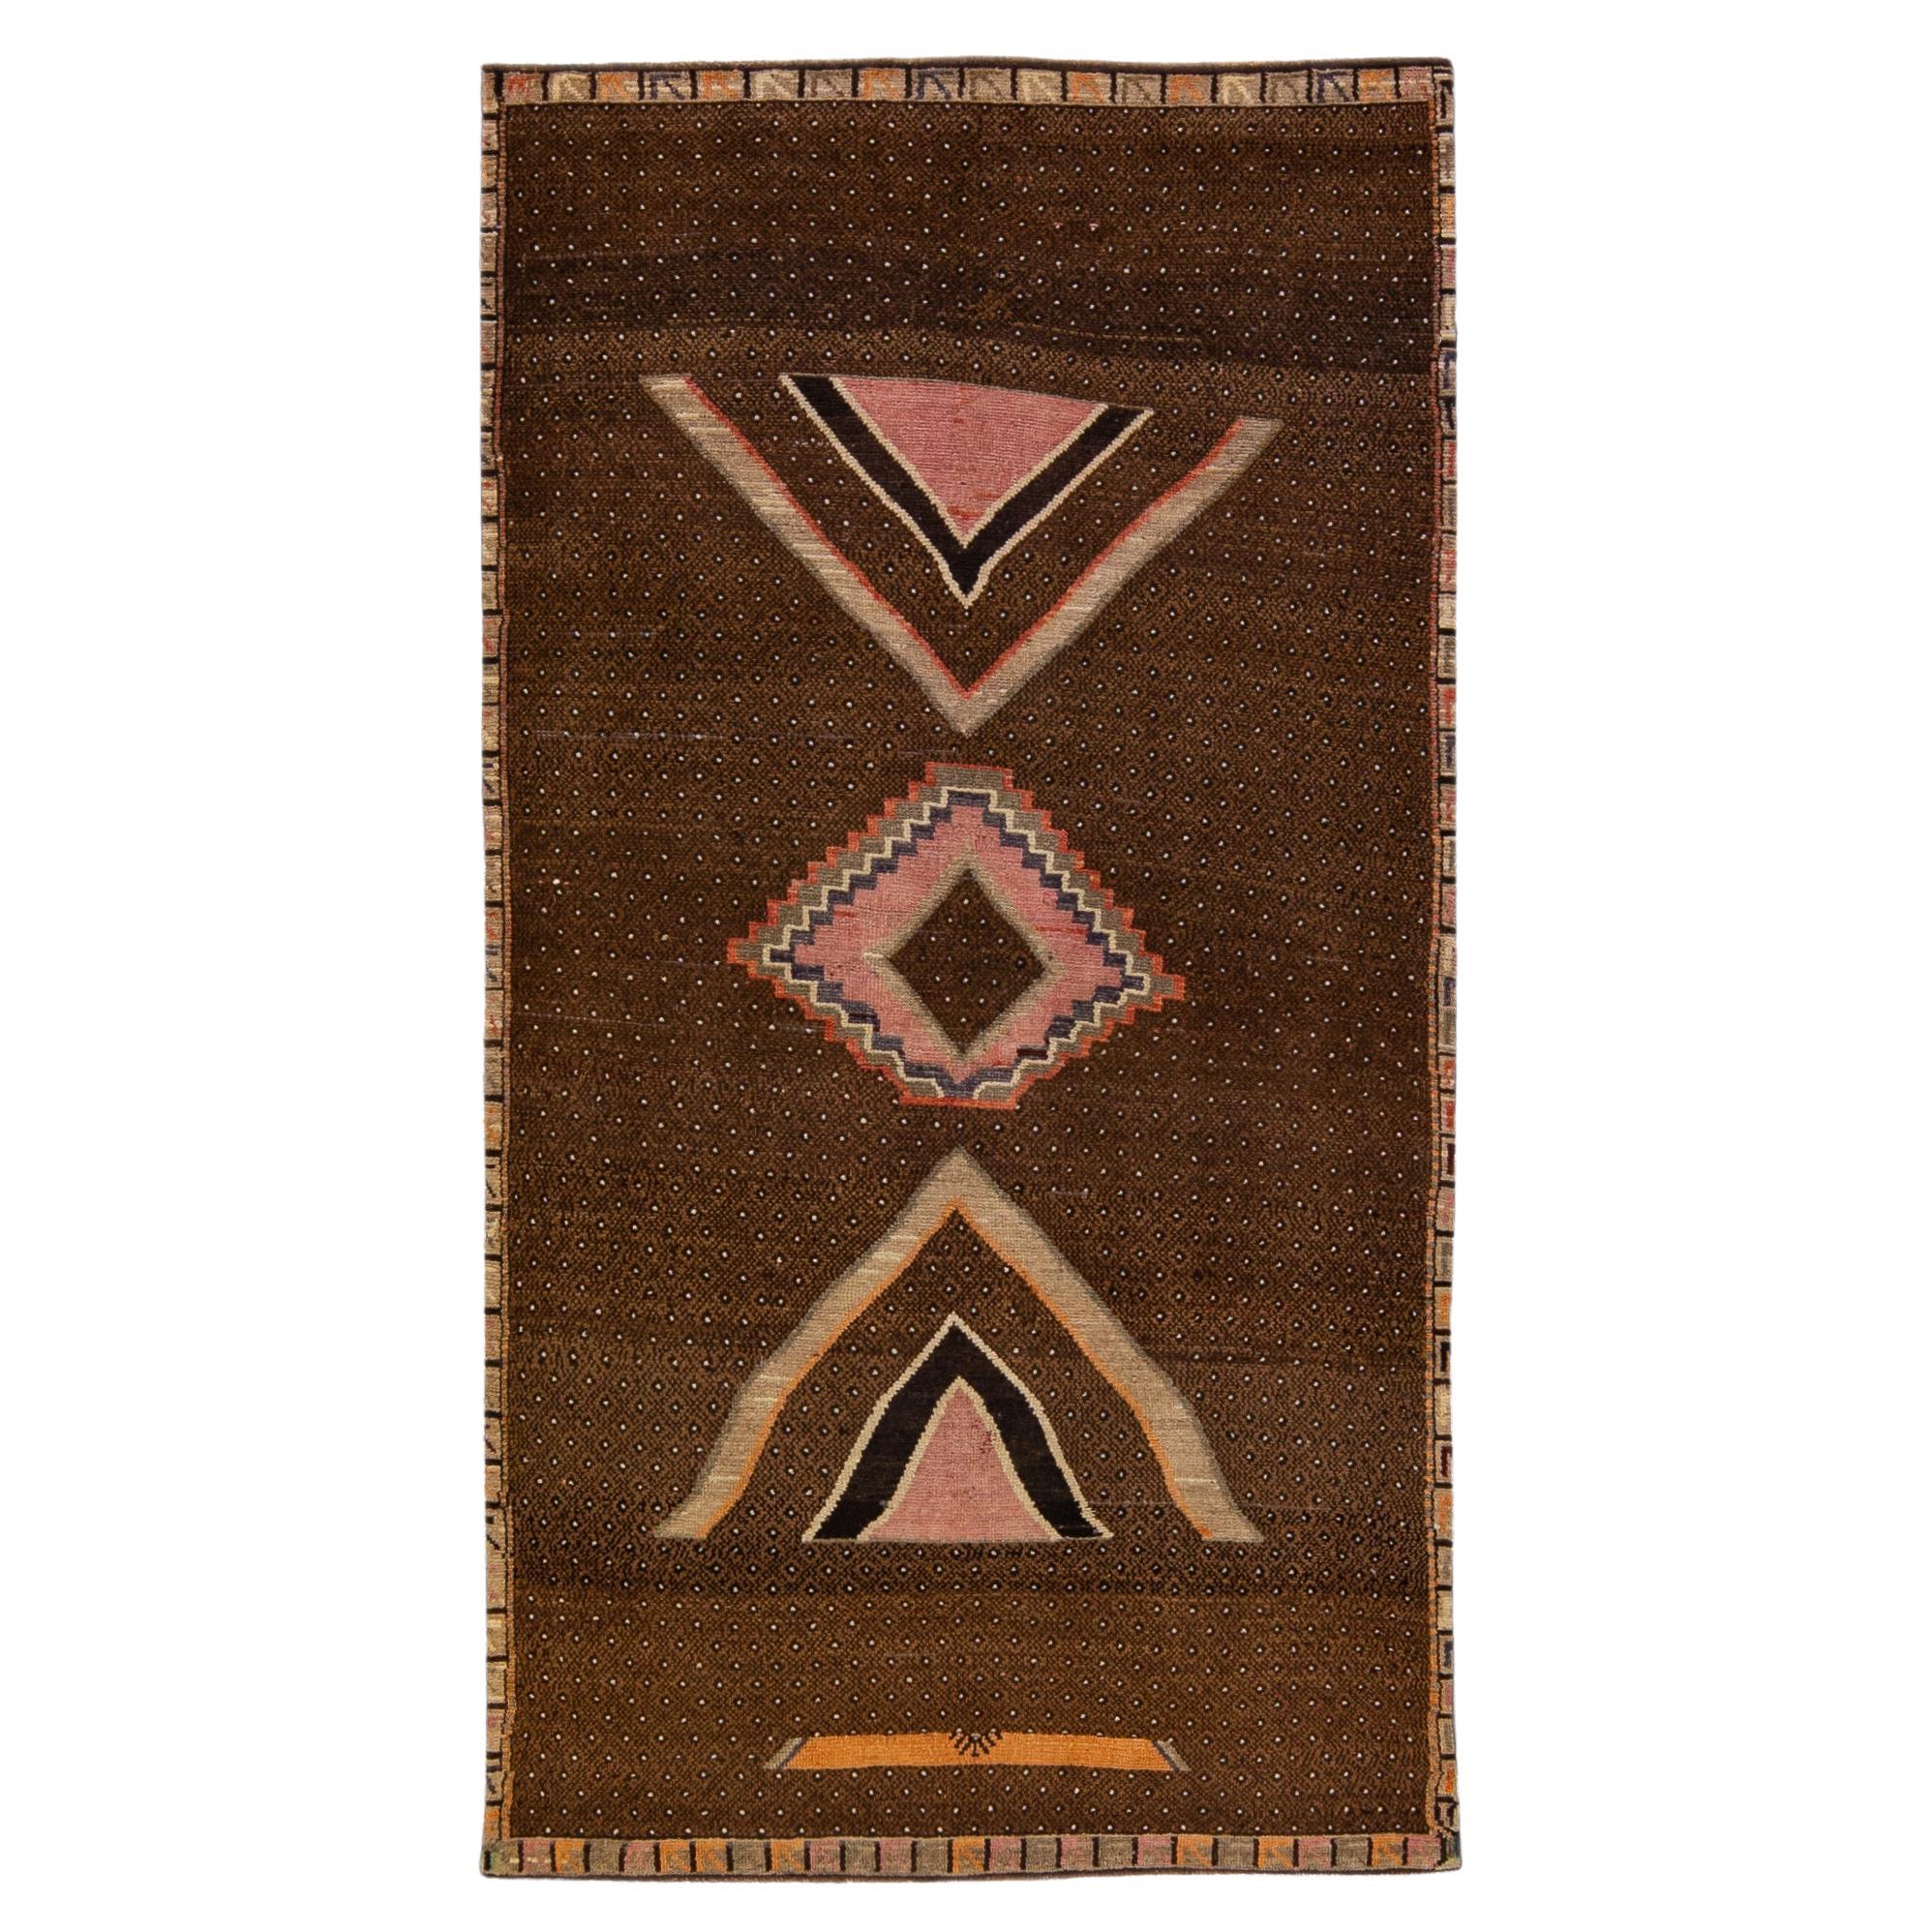 Vintage Turkish Rugs and Carpets - 15,895 For Sale at 1stdibs